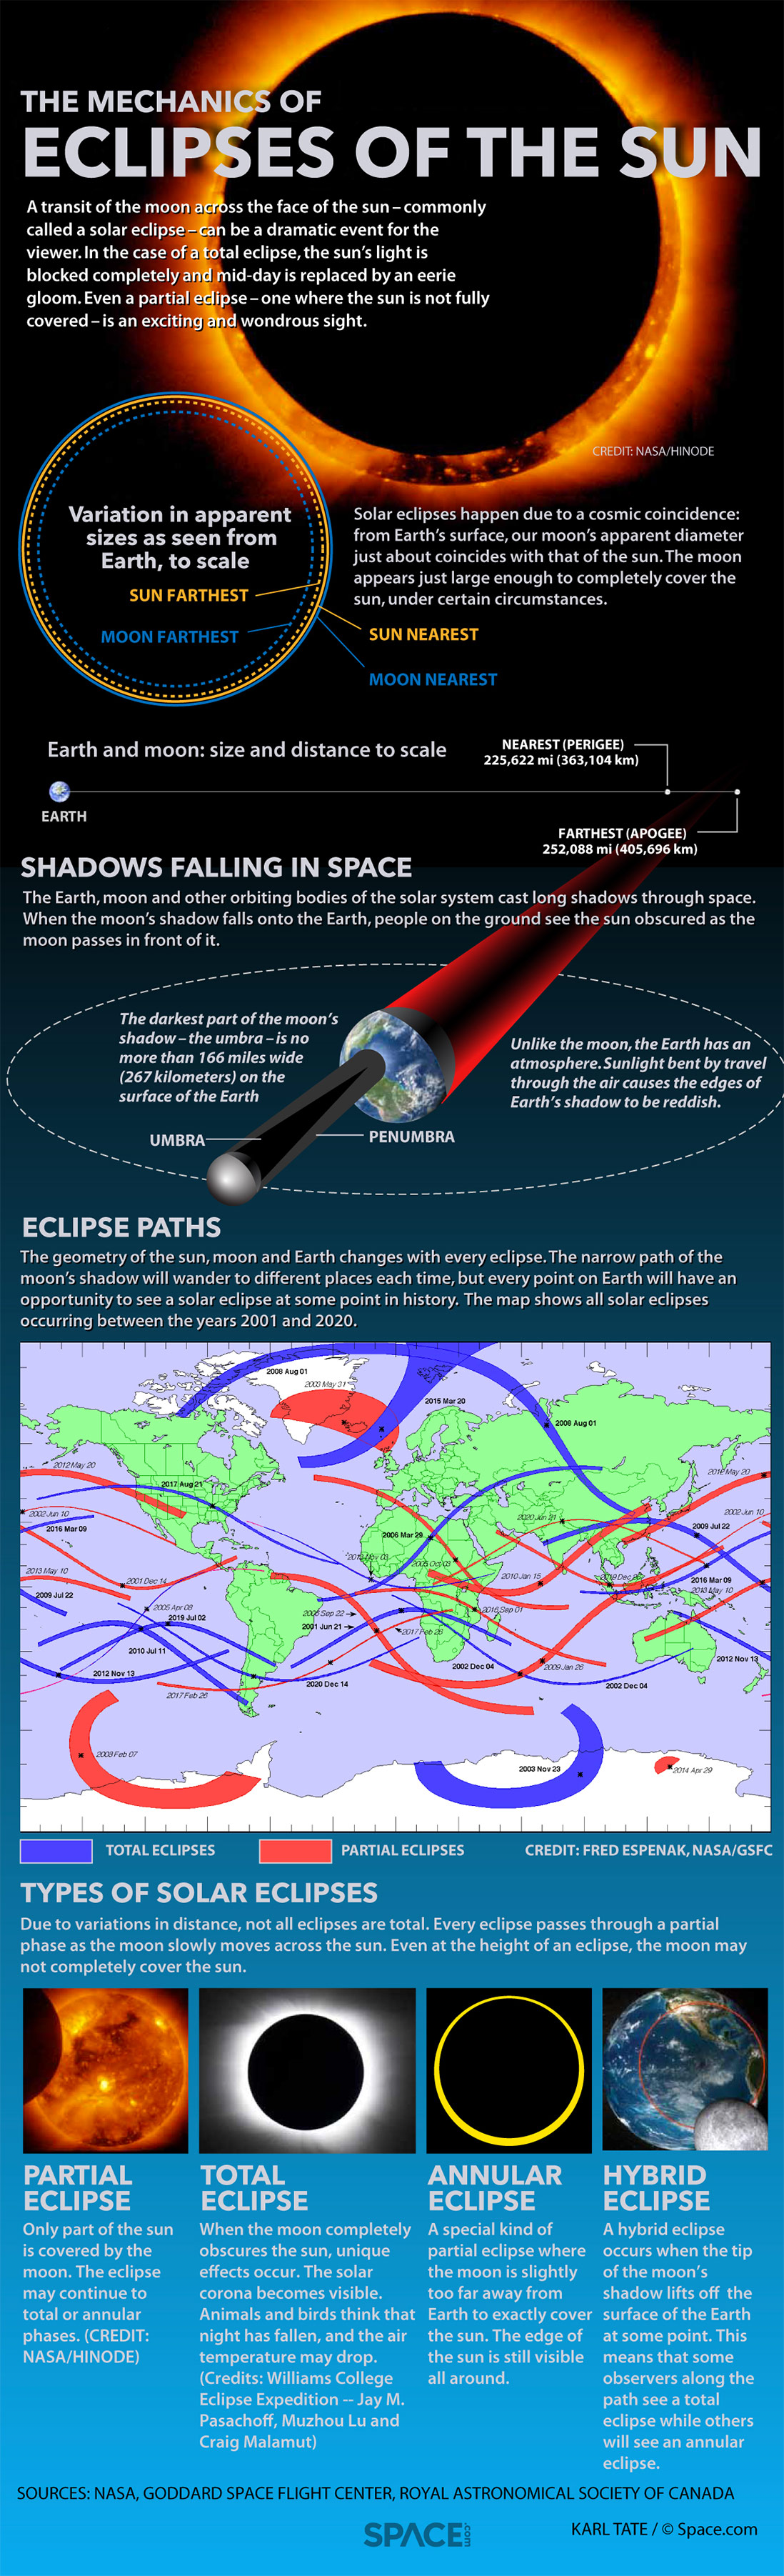 Eclipse Infographic - Karl Tate, SPACE.com Contributor